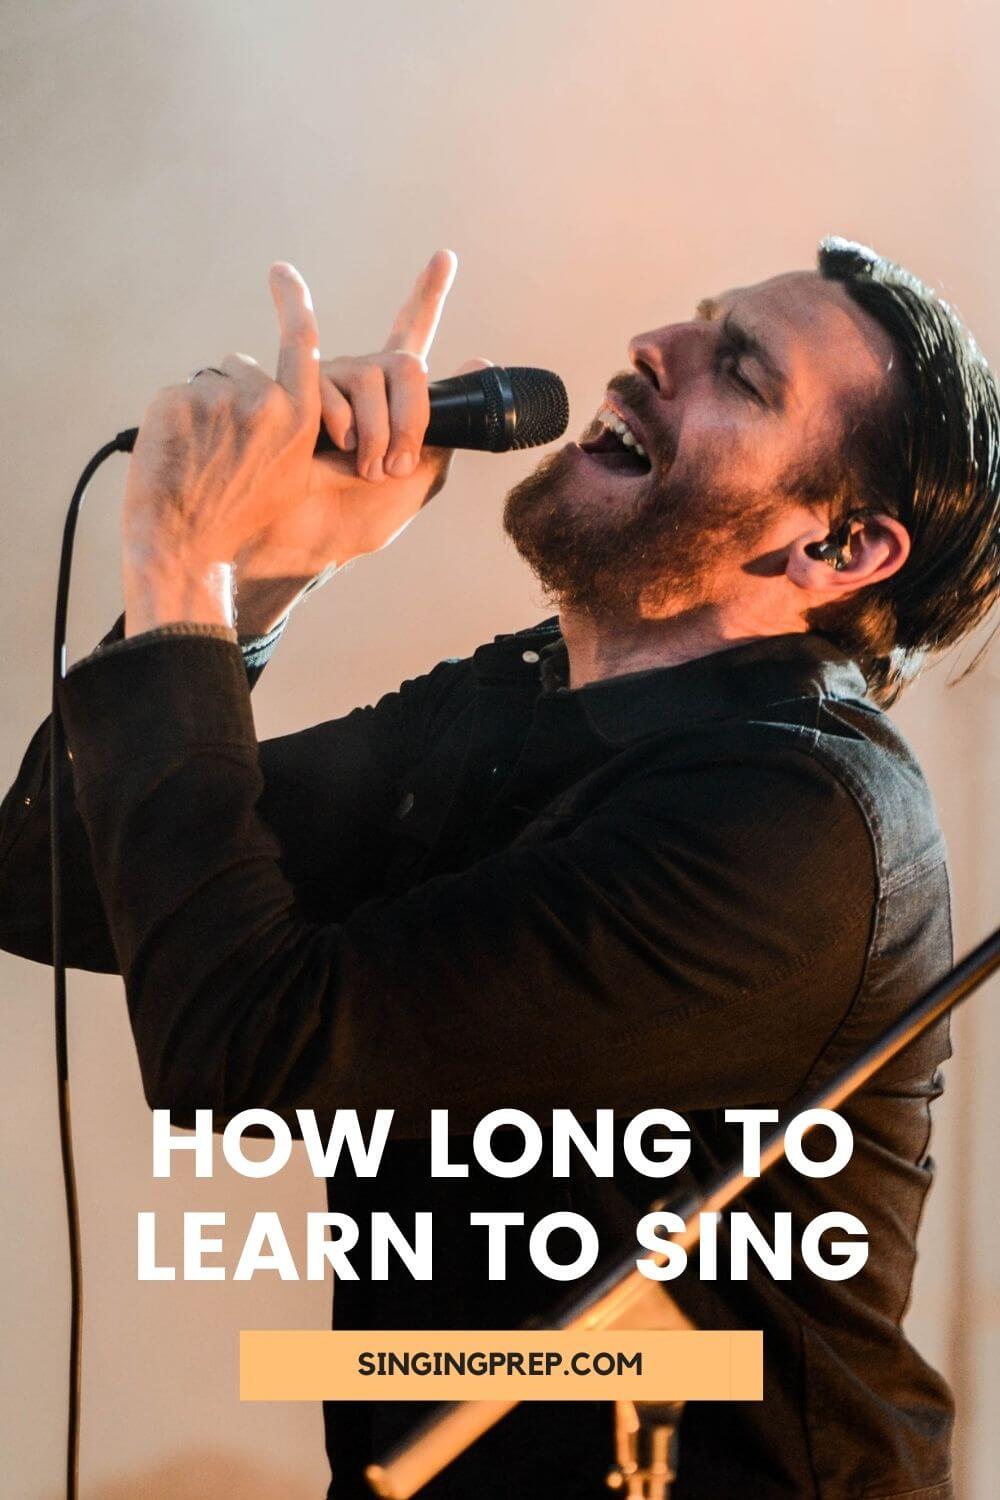 How long to learn to sing pin